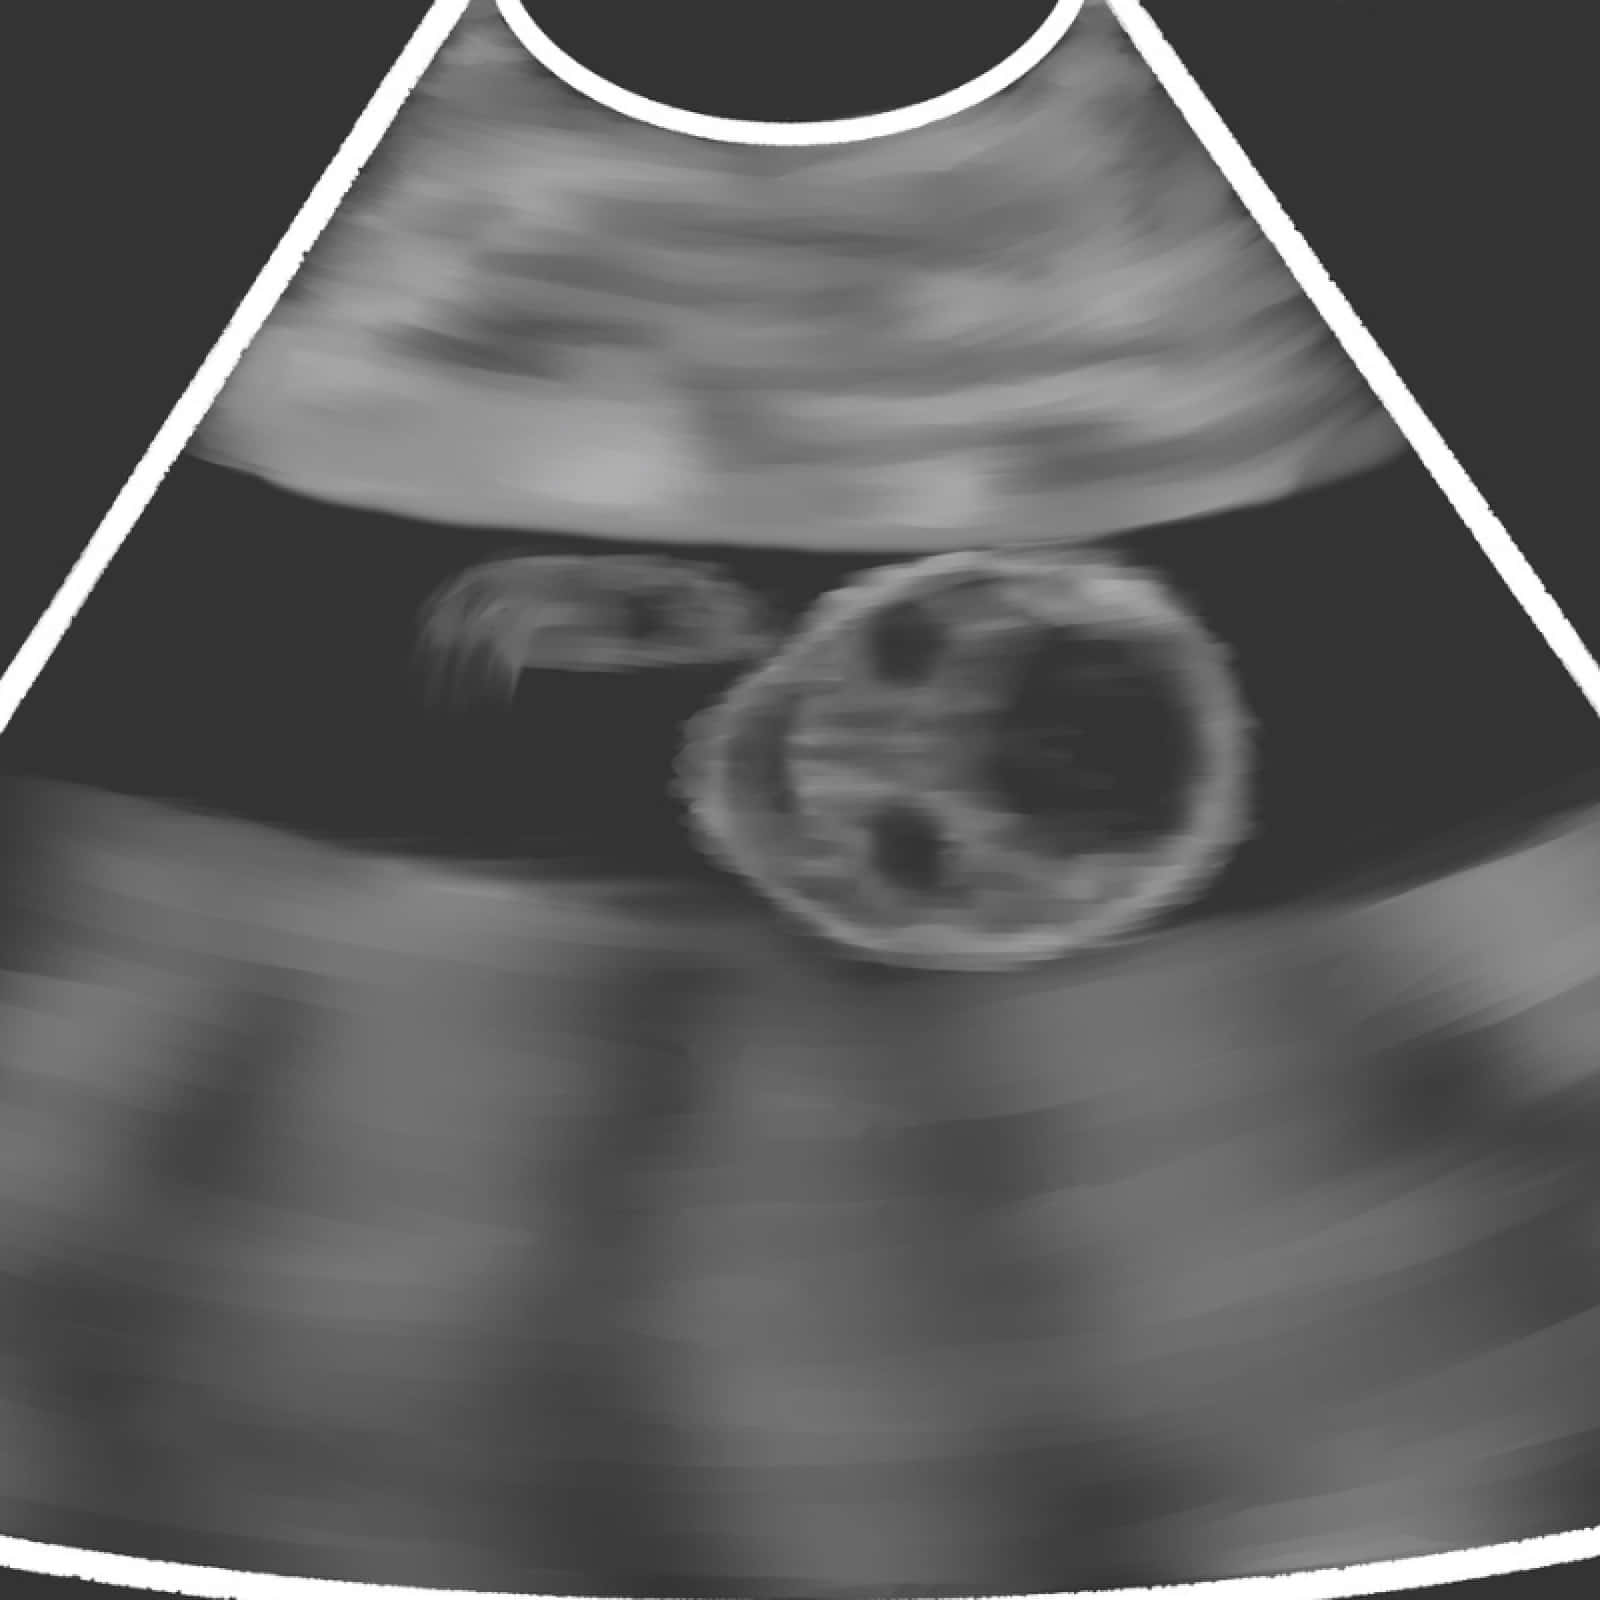 A Glimpse into the Fun Side of Pregnancy - Hilarious Ultrasound Image